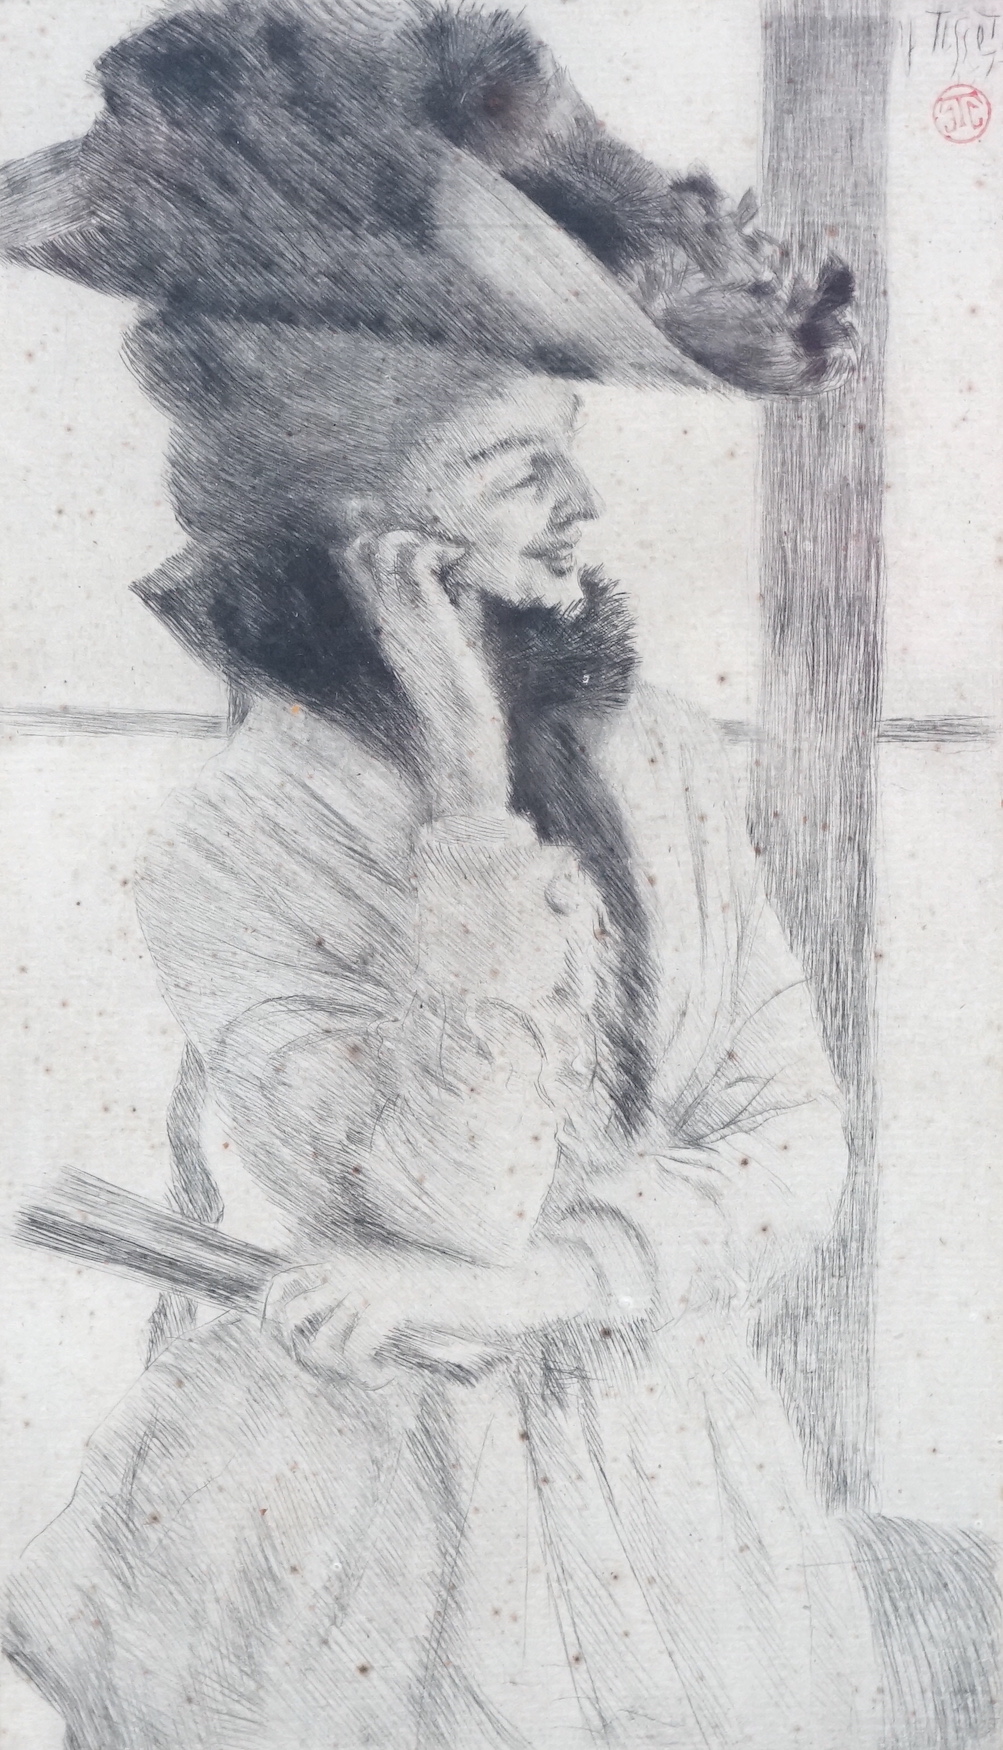 James Jacques Tissot (French, 1836-1902), 'A la fenêtre [At the Window]', [Wentworth 9], drypoint etching on laid paper, 1877, 19 x 10.75cm